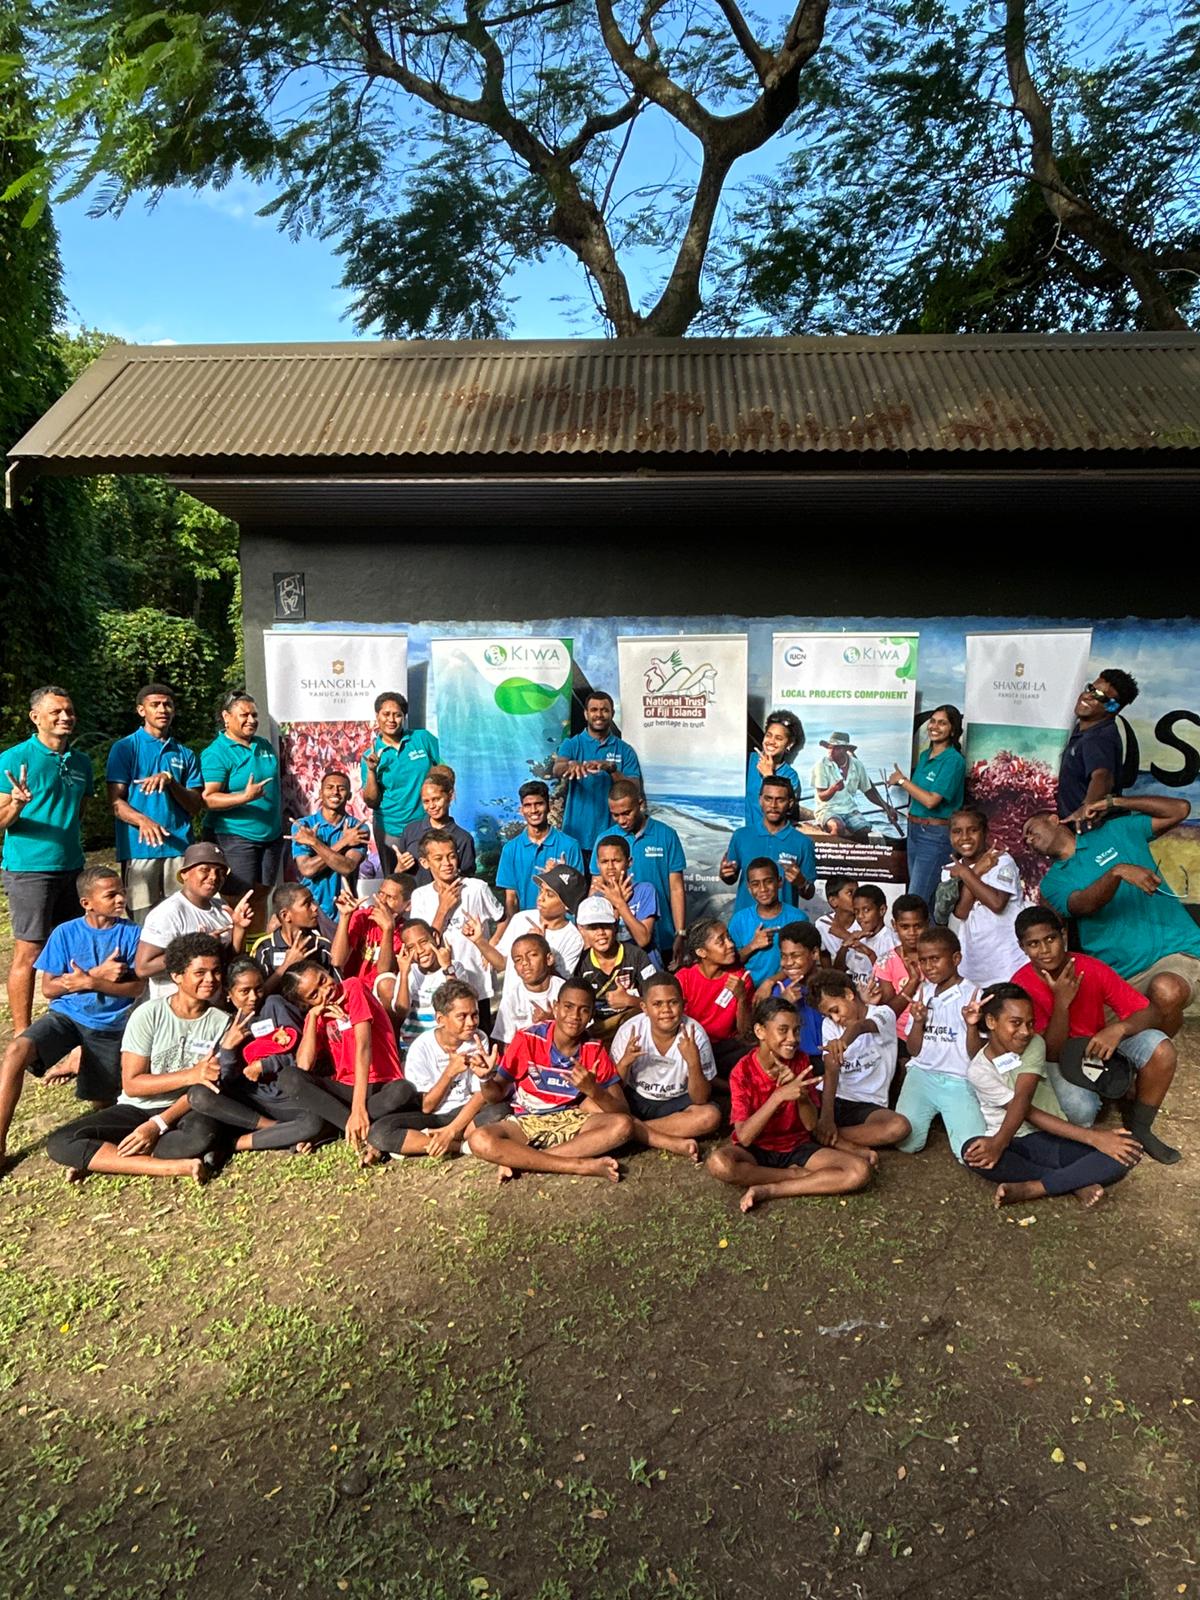 HIYH students, Sigatoka Sand Dunes and invited colleagues from the Kiwa Initiative Programme and Shangri-La, after the activities and sessions during the final day of the  HIYH EcoCamp. 